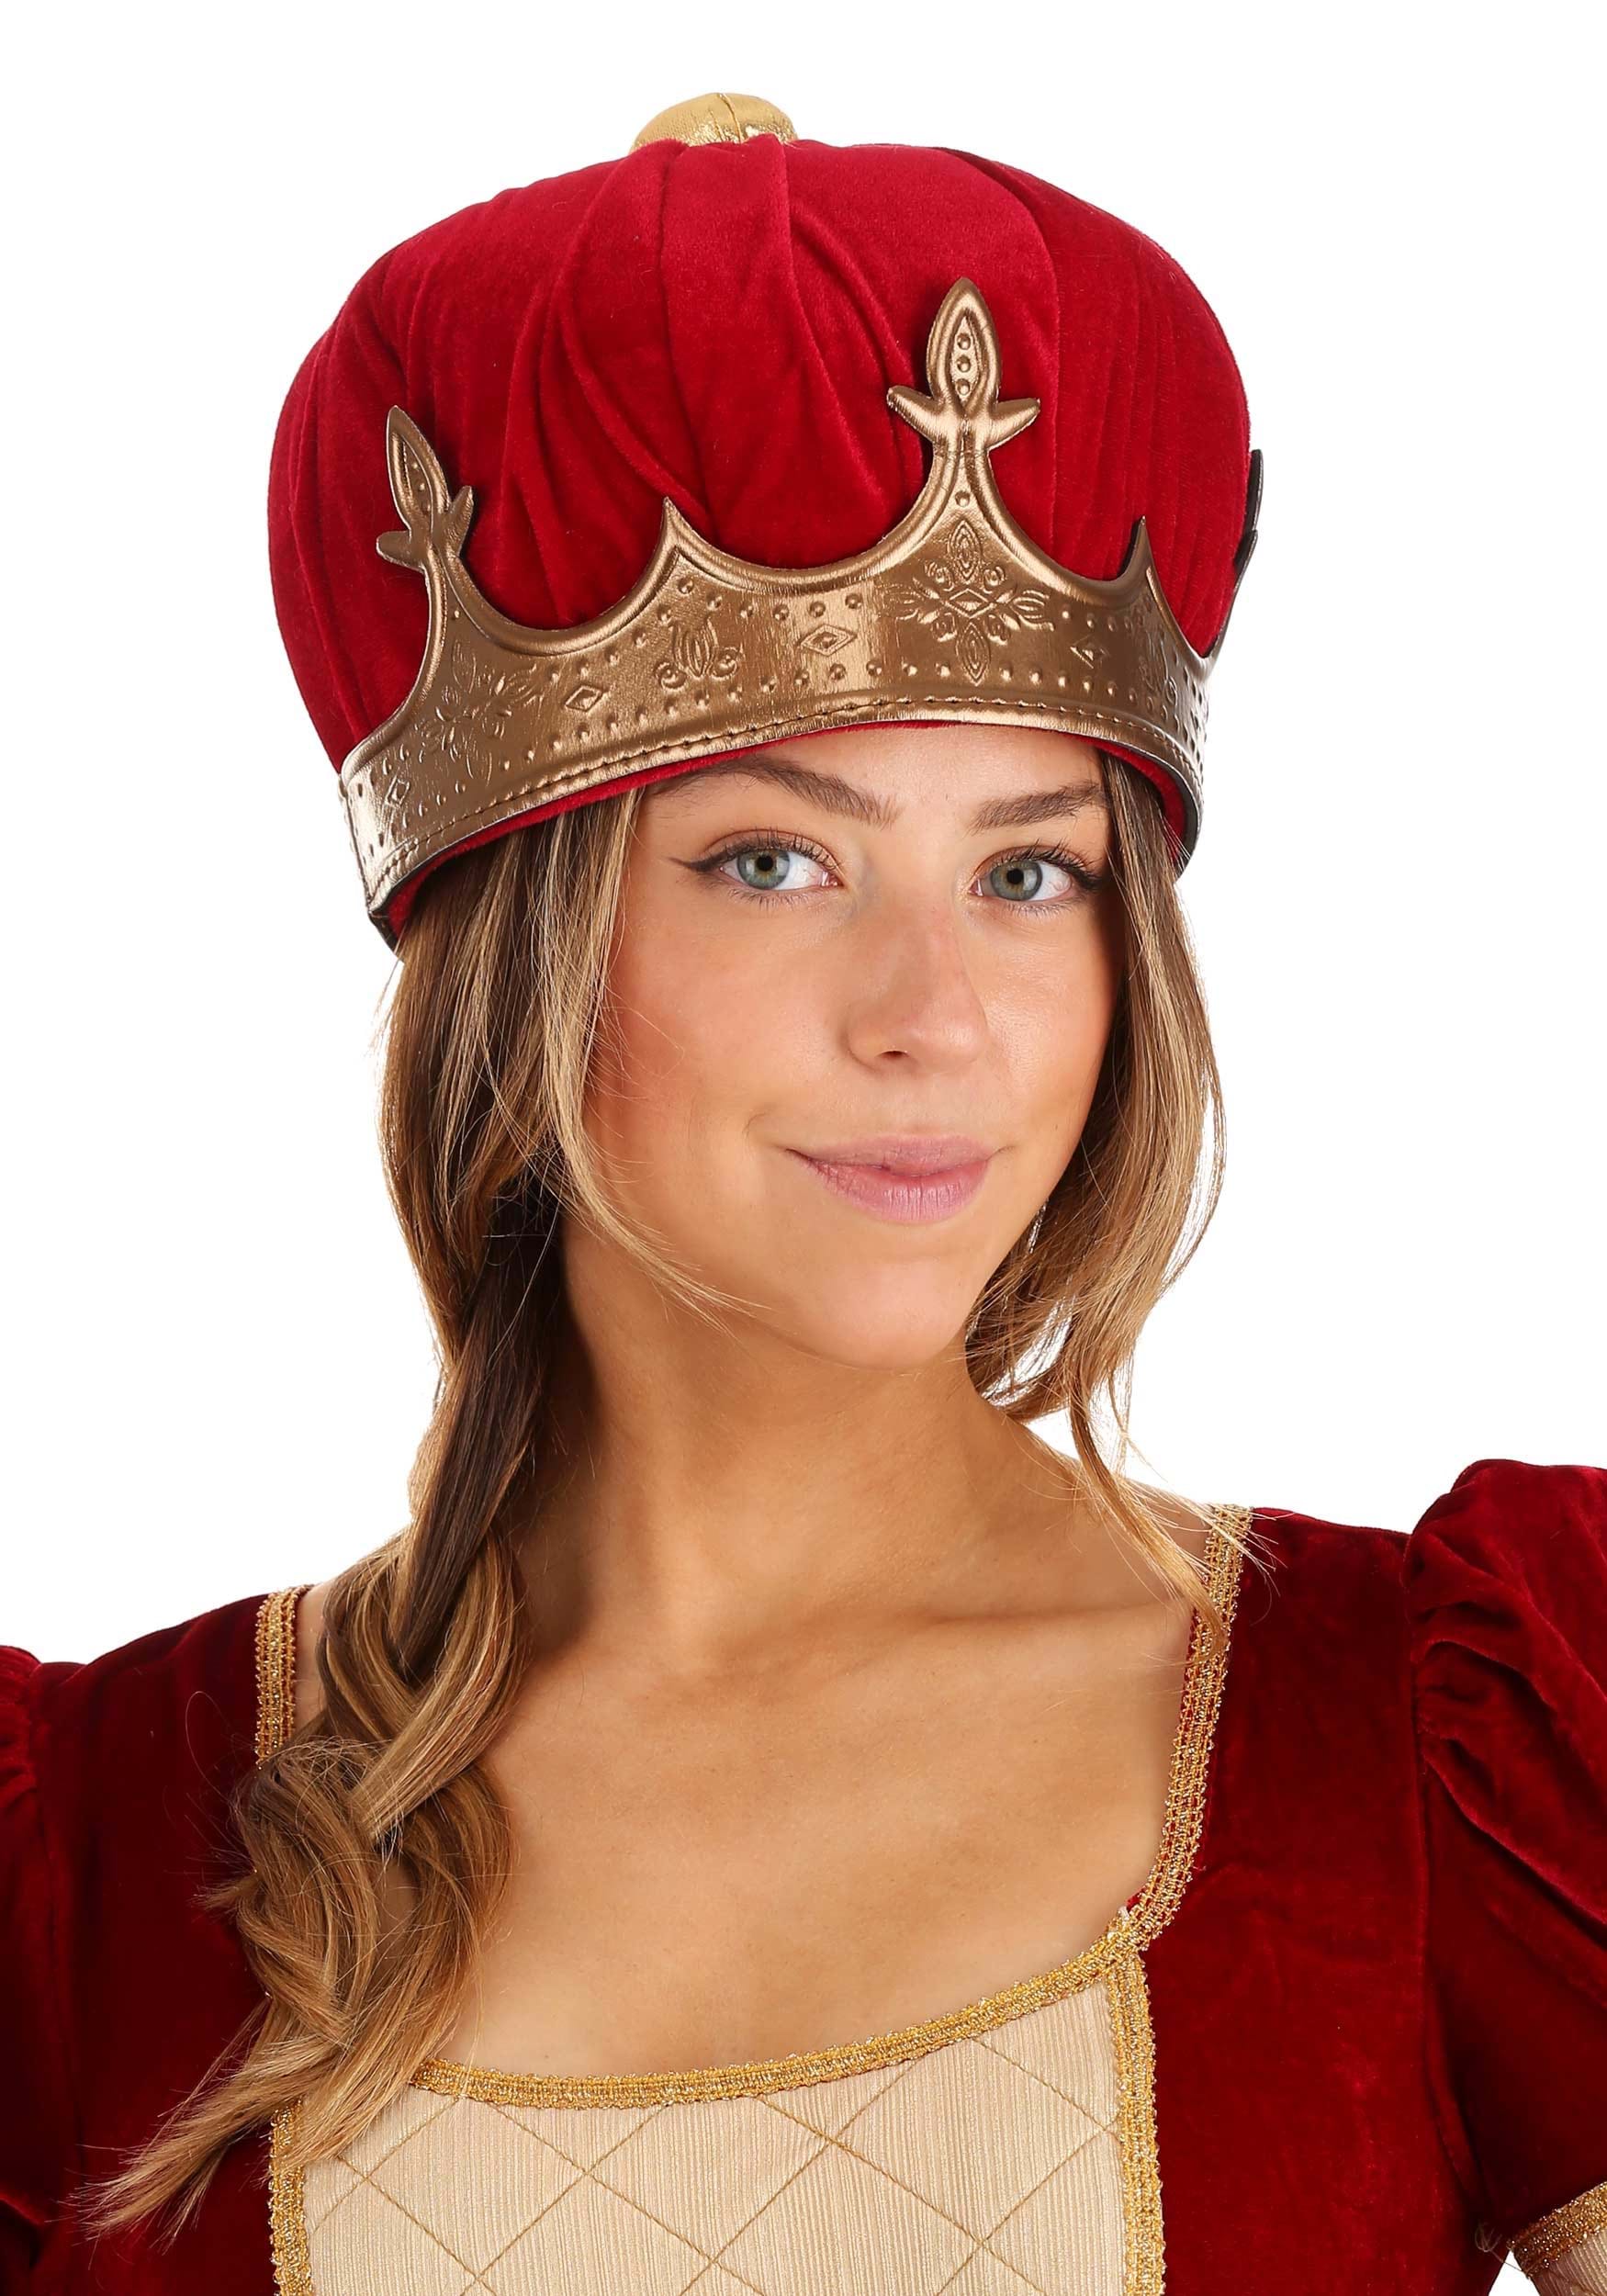 Adult Plush Queen Costume Crown